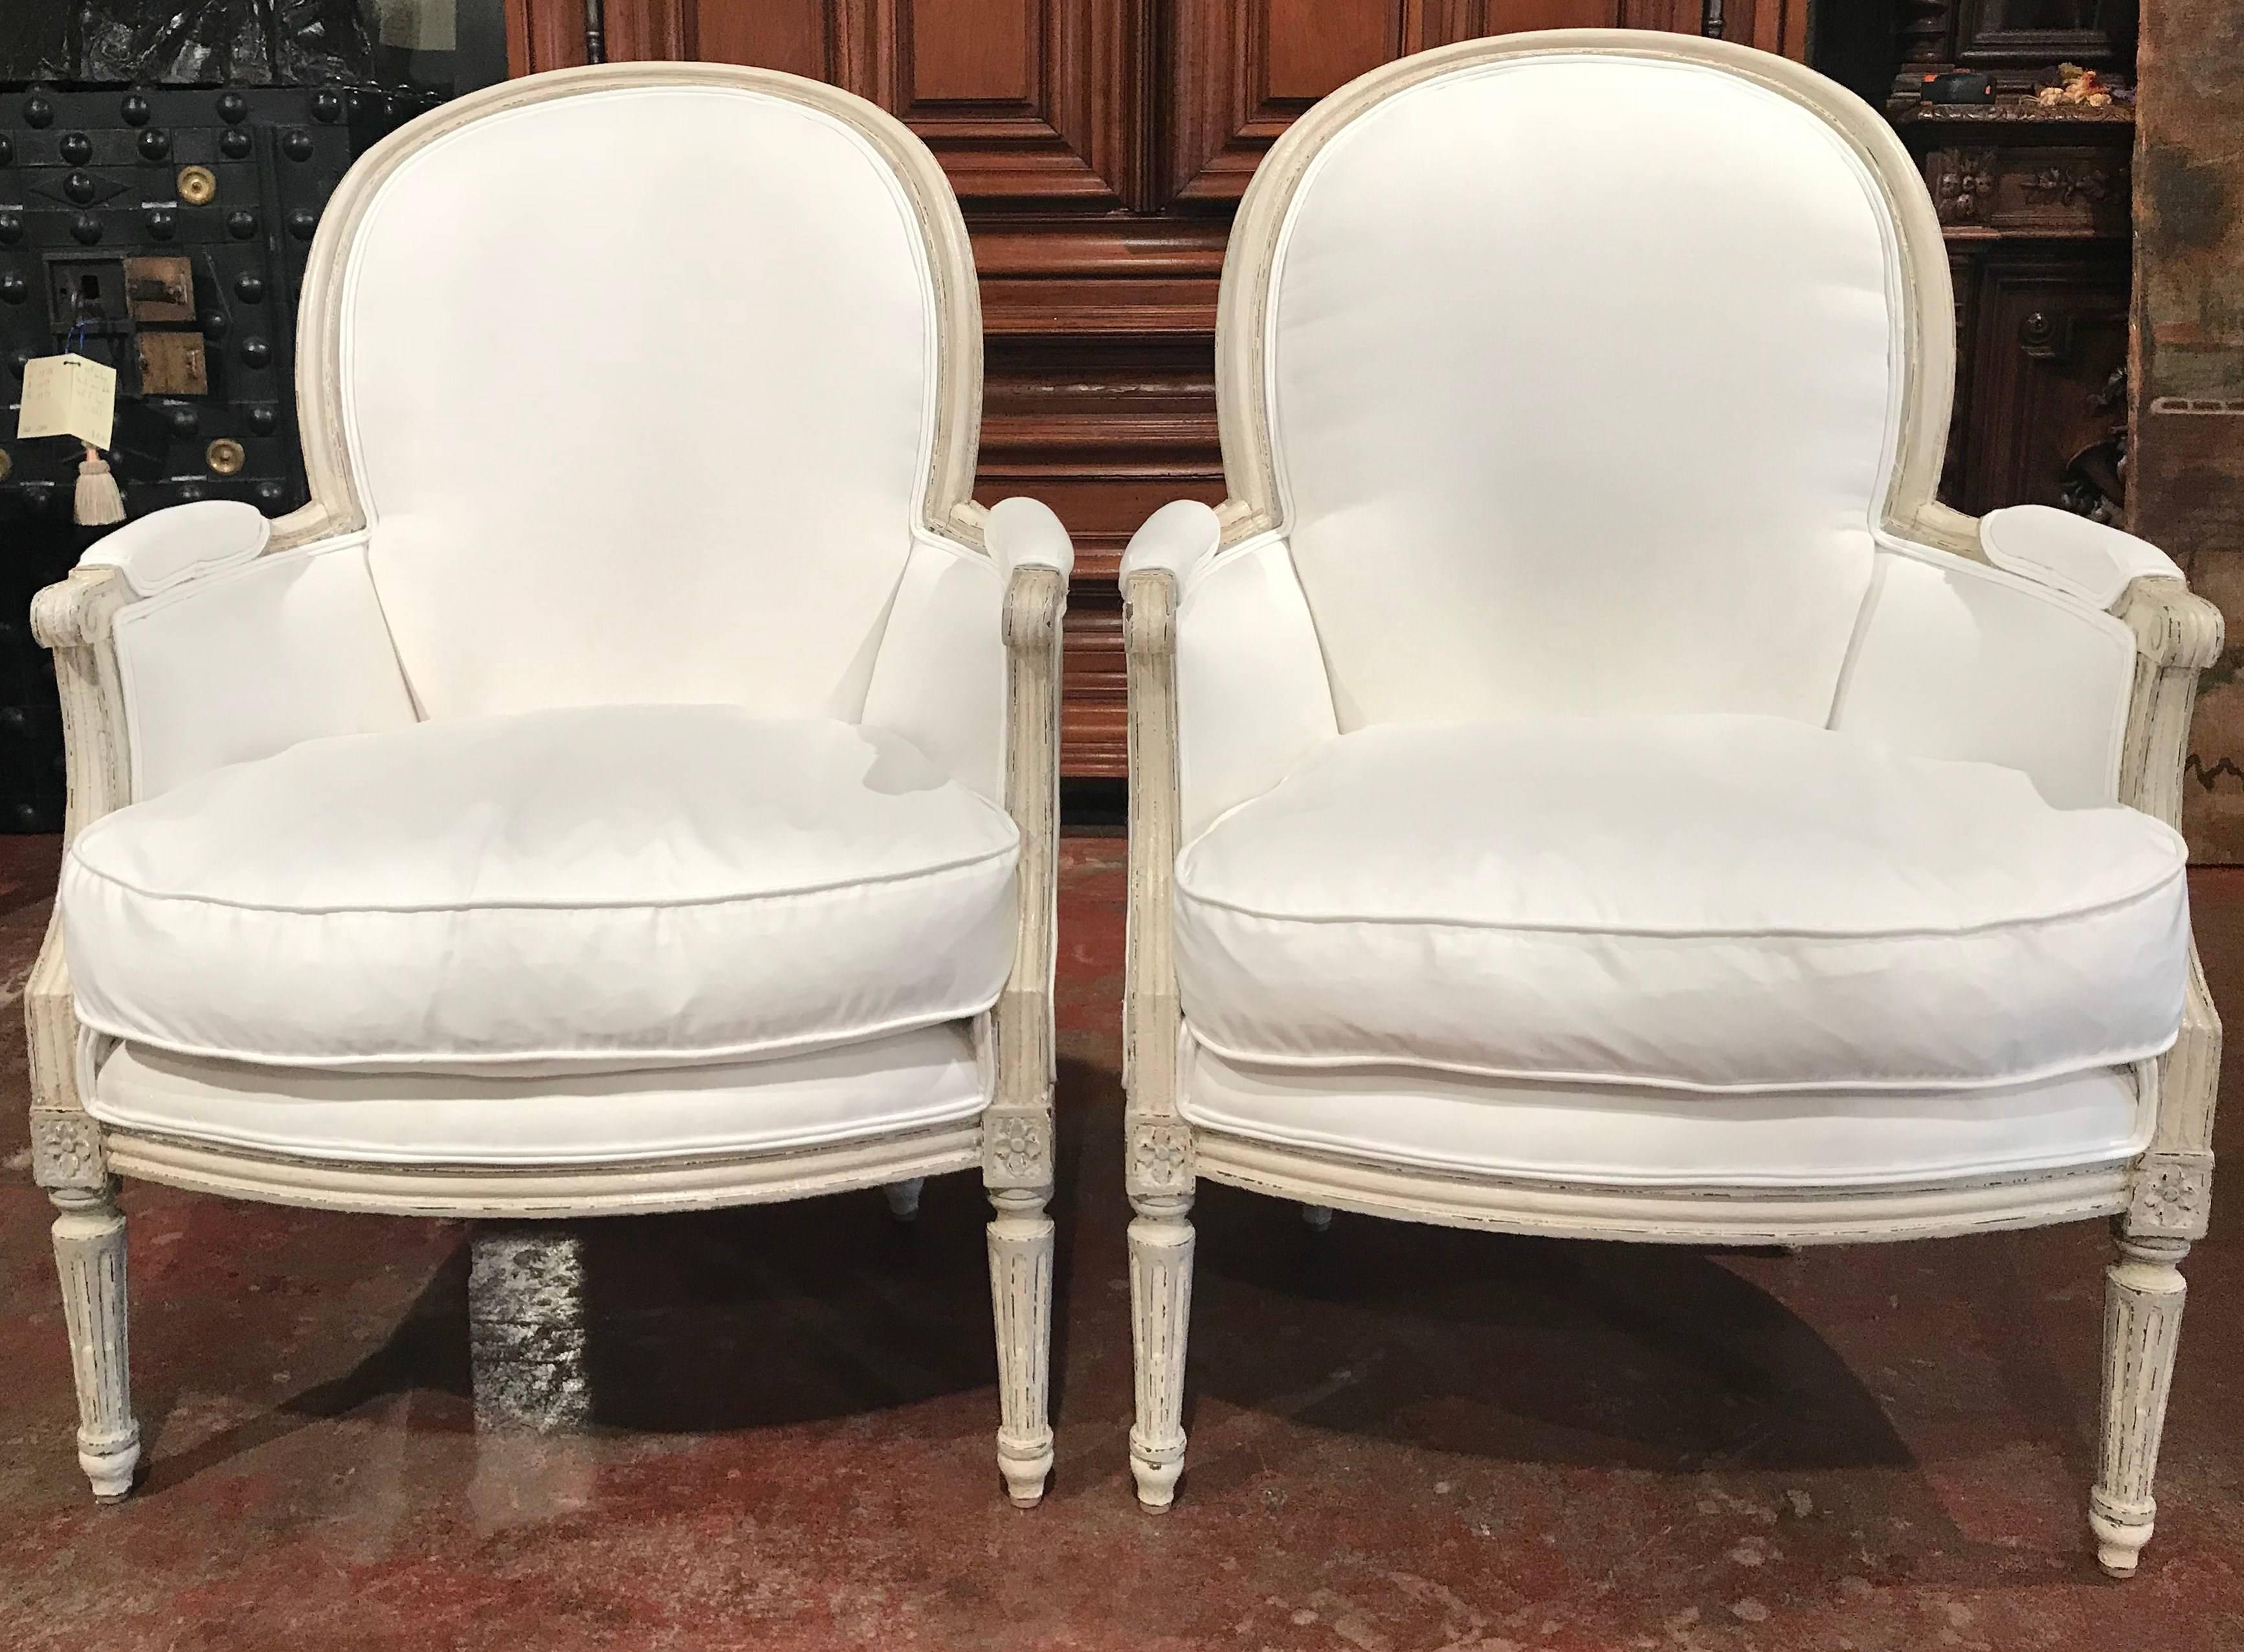 This elegant pair of painted bergeres was crafted in France, circa 1880. Each armchair features beautiful carved medallions designs above the tapered legs, two armrests and a curved and rounded back. The chairs are completed with comfortable down